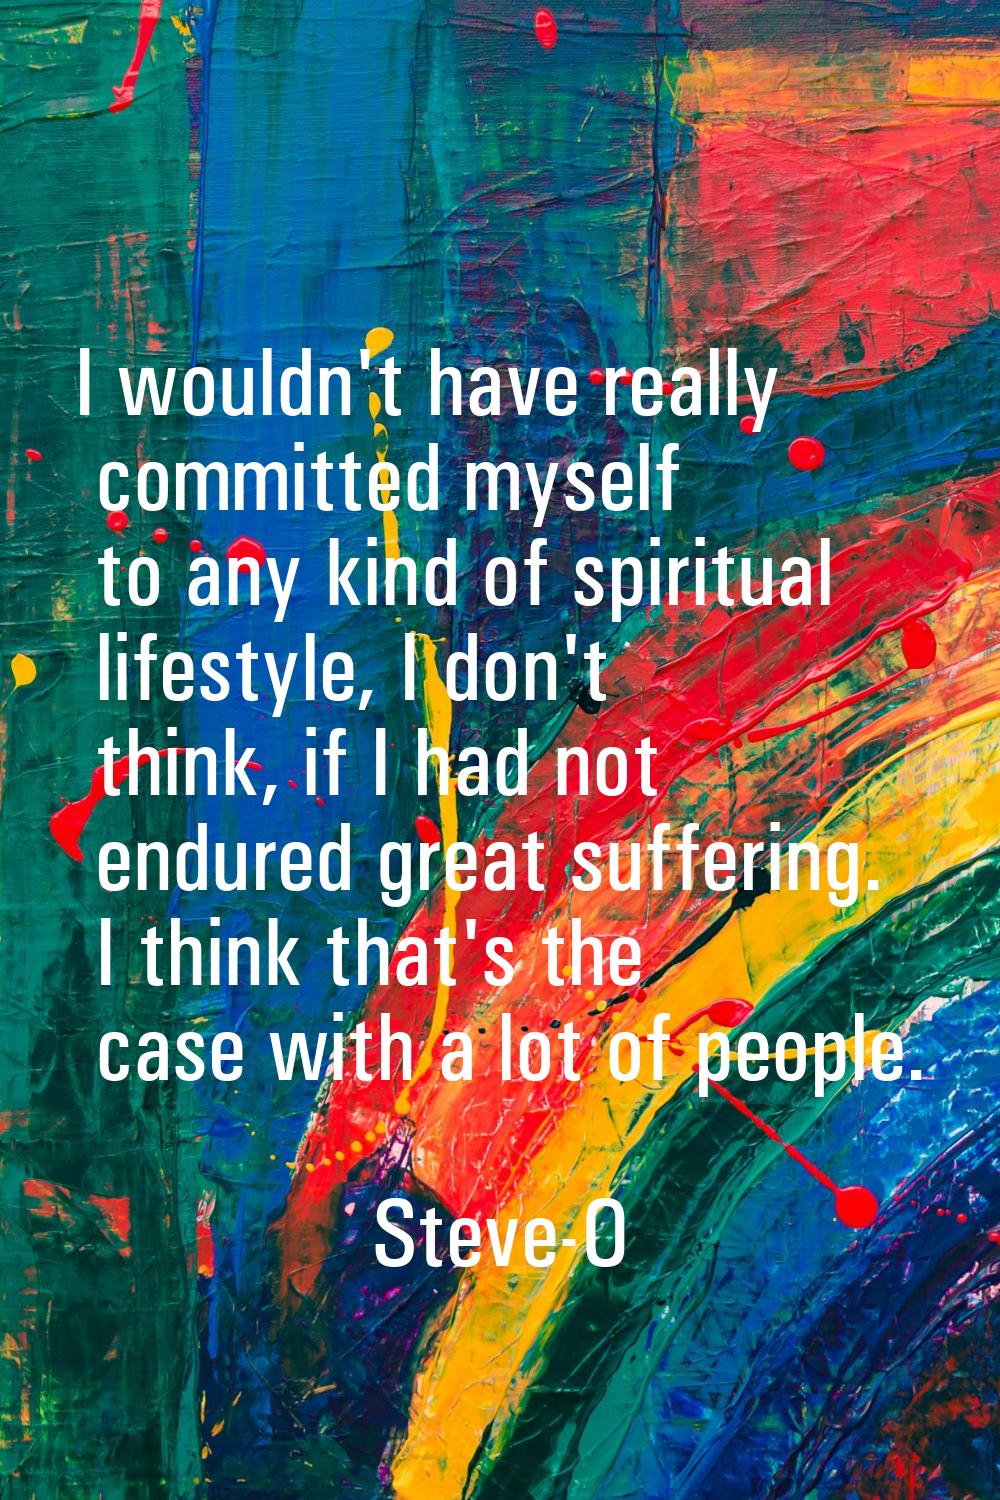 I wouldn't have really committed myself to any kind of spiritual lifestyle, I don't think, if I had